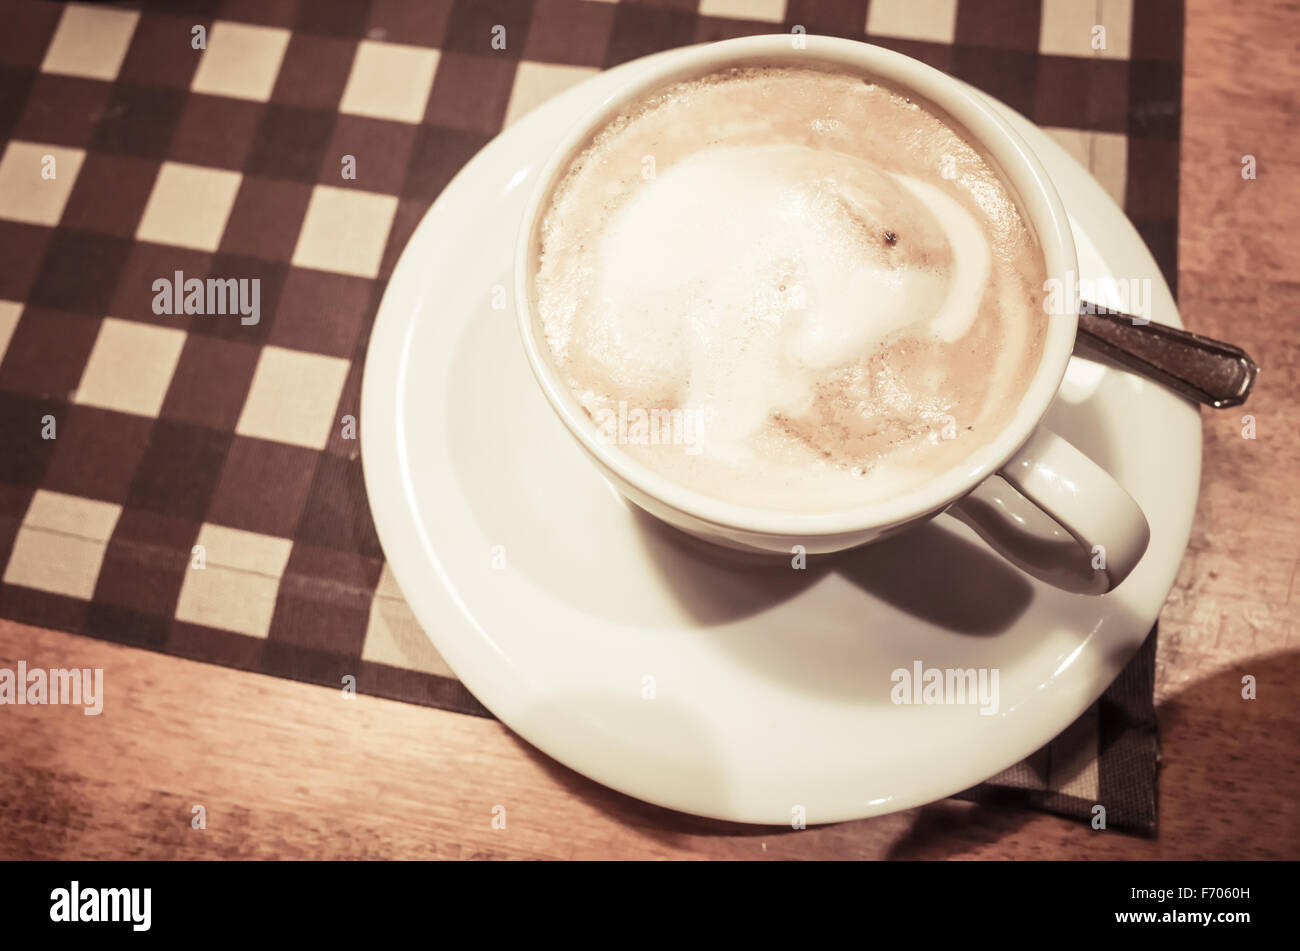 White cup of cappuccino stands on wooden table, retro style warm tonal correction photo filter and selective focus Stock Photo